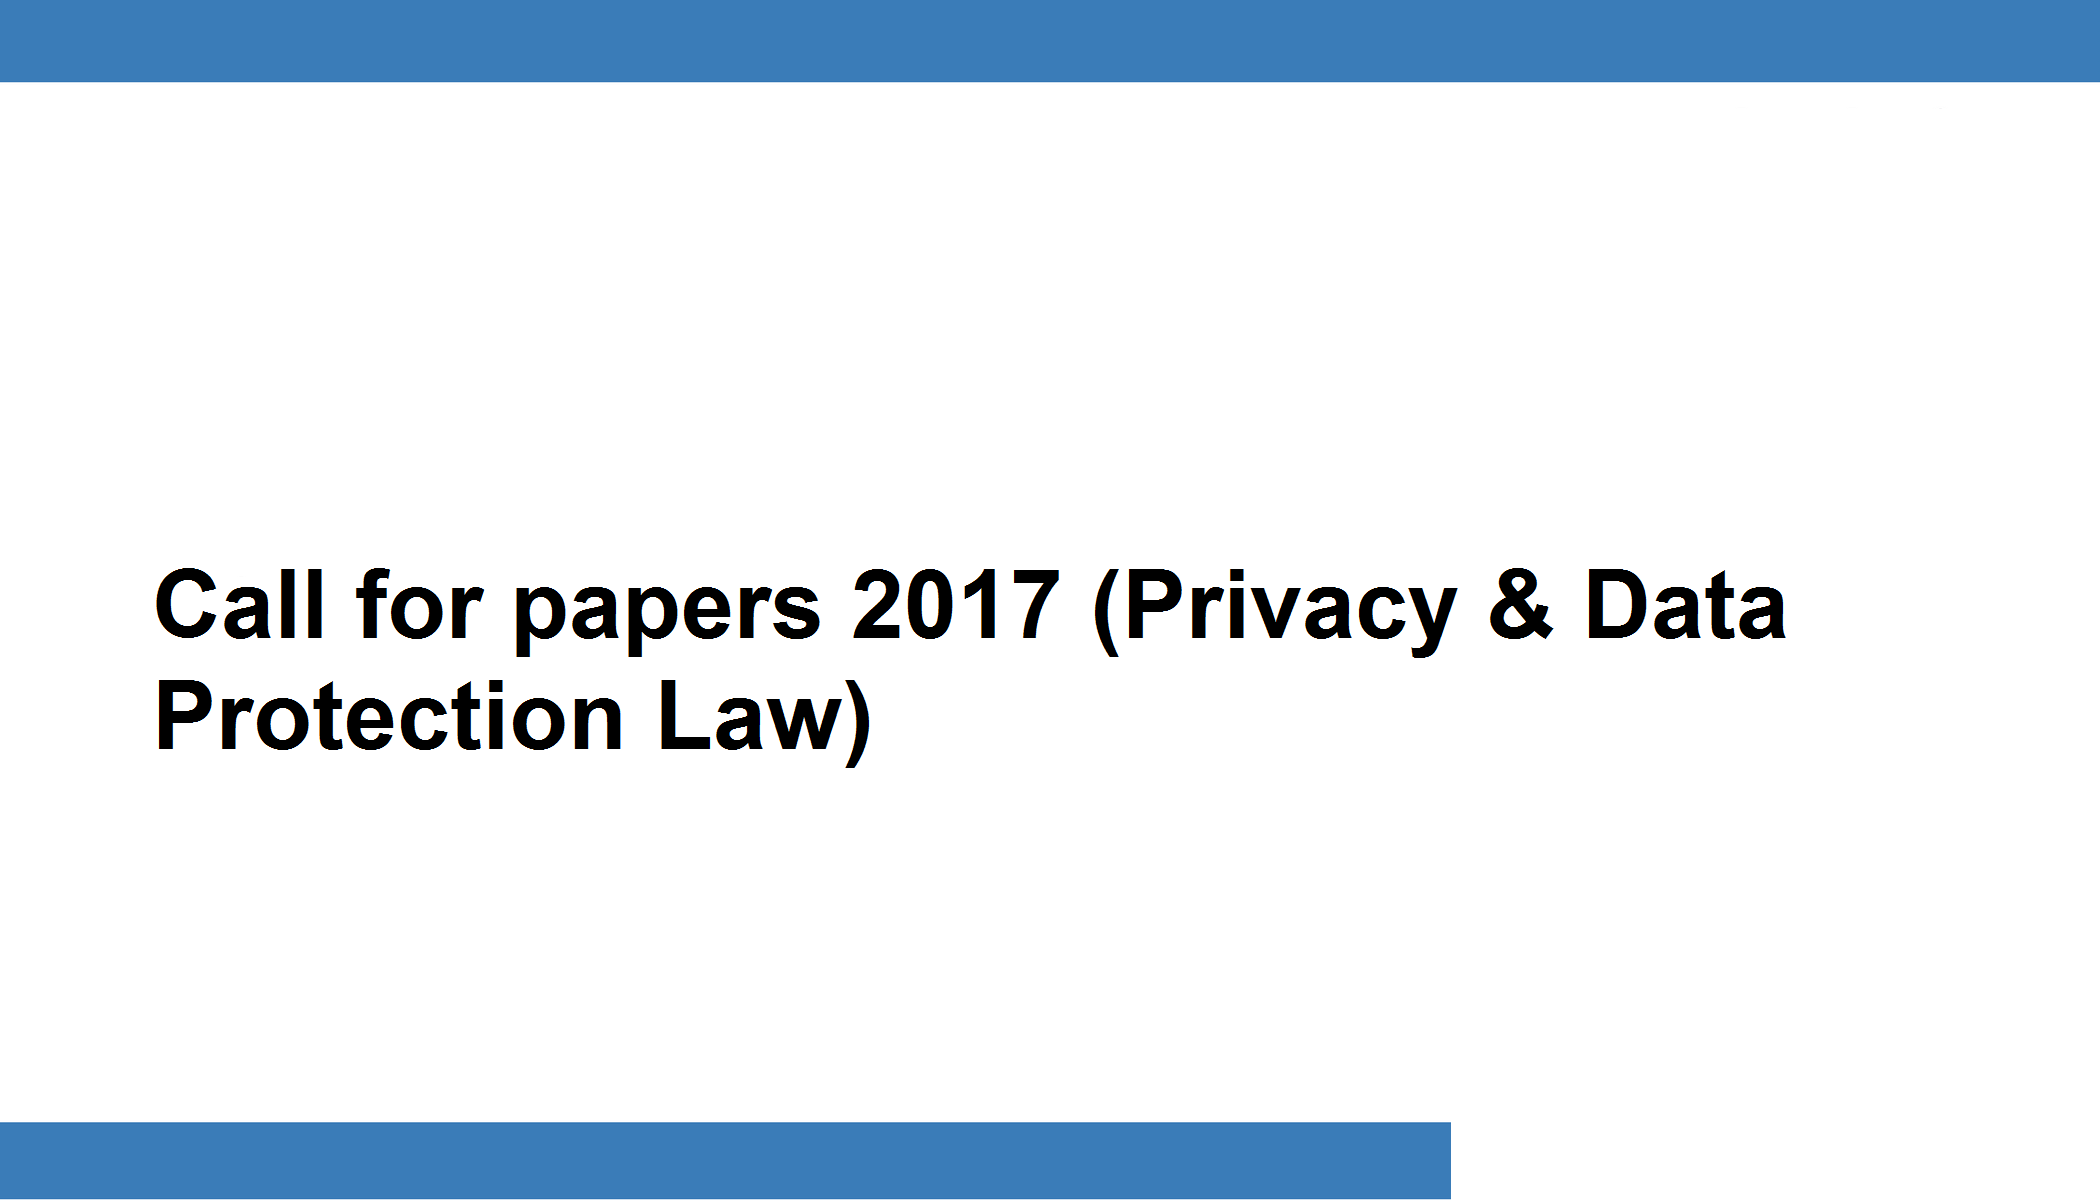 Call for papers 2017 (Privacy & Data Protection Law)